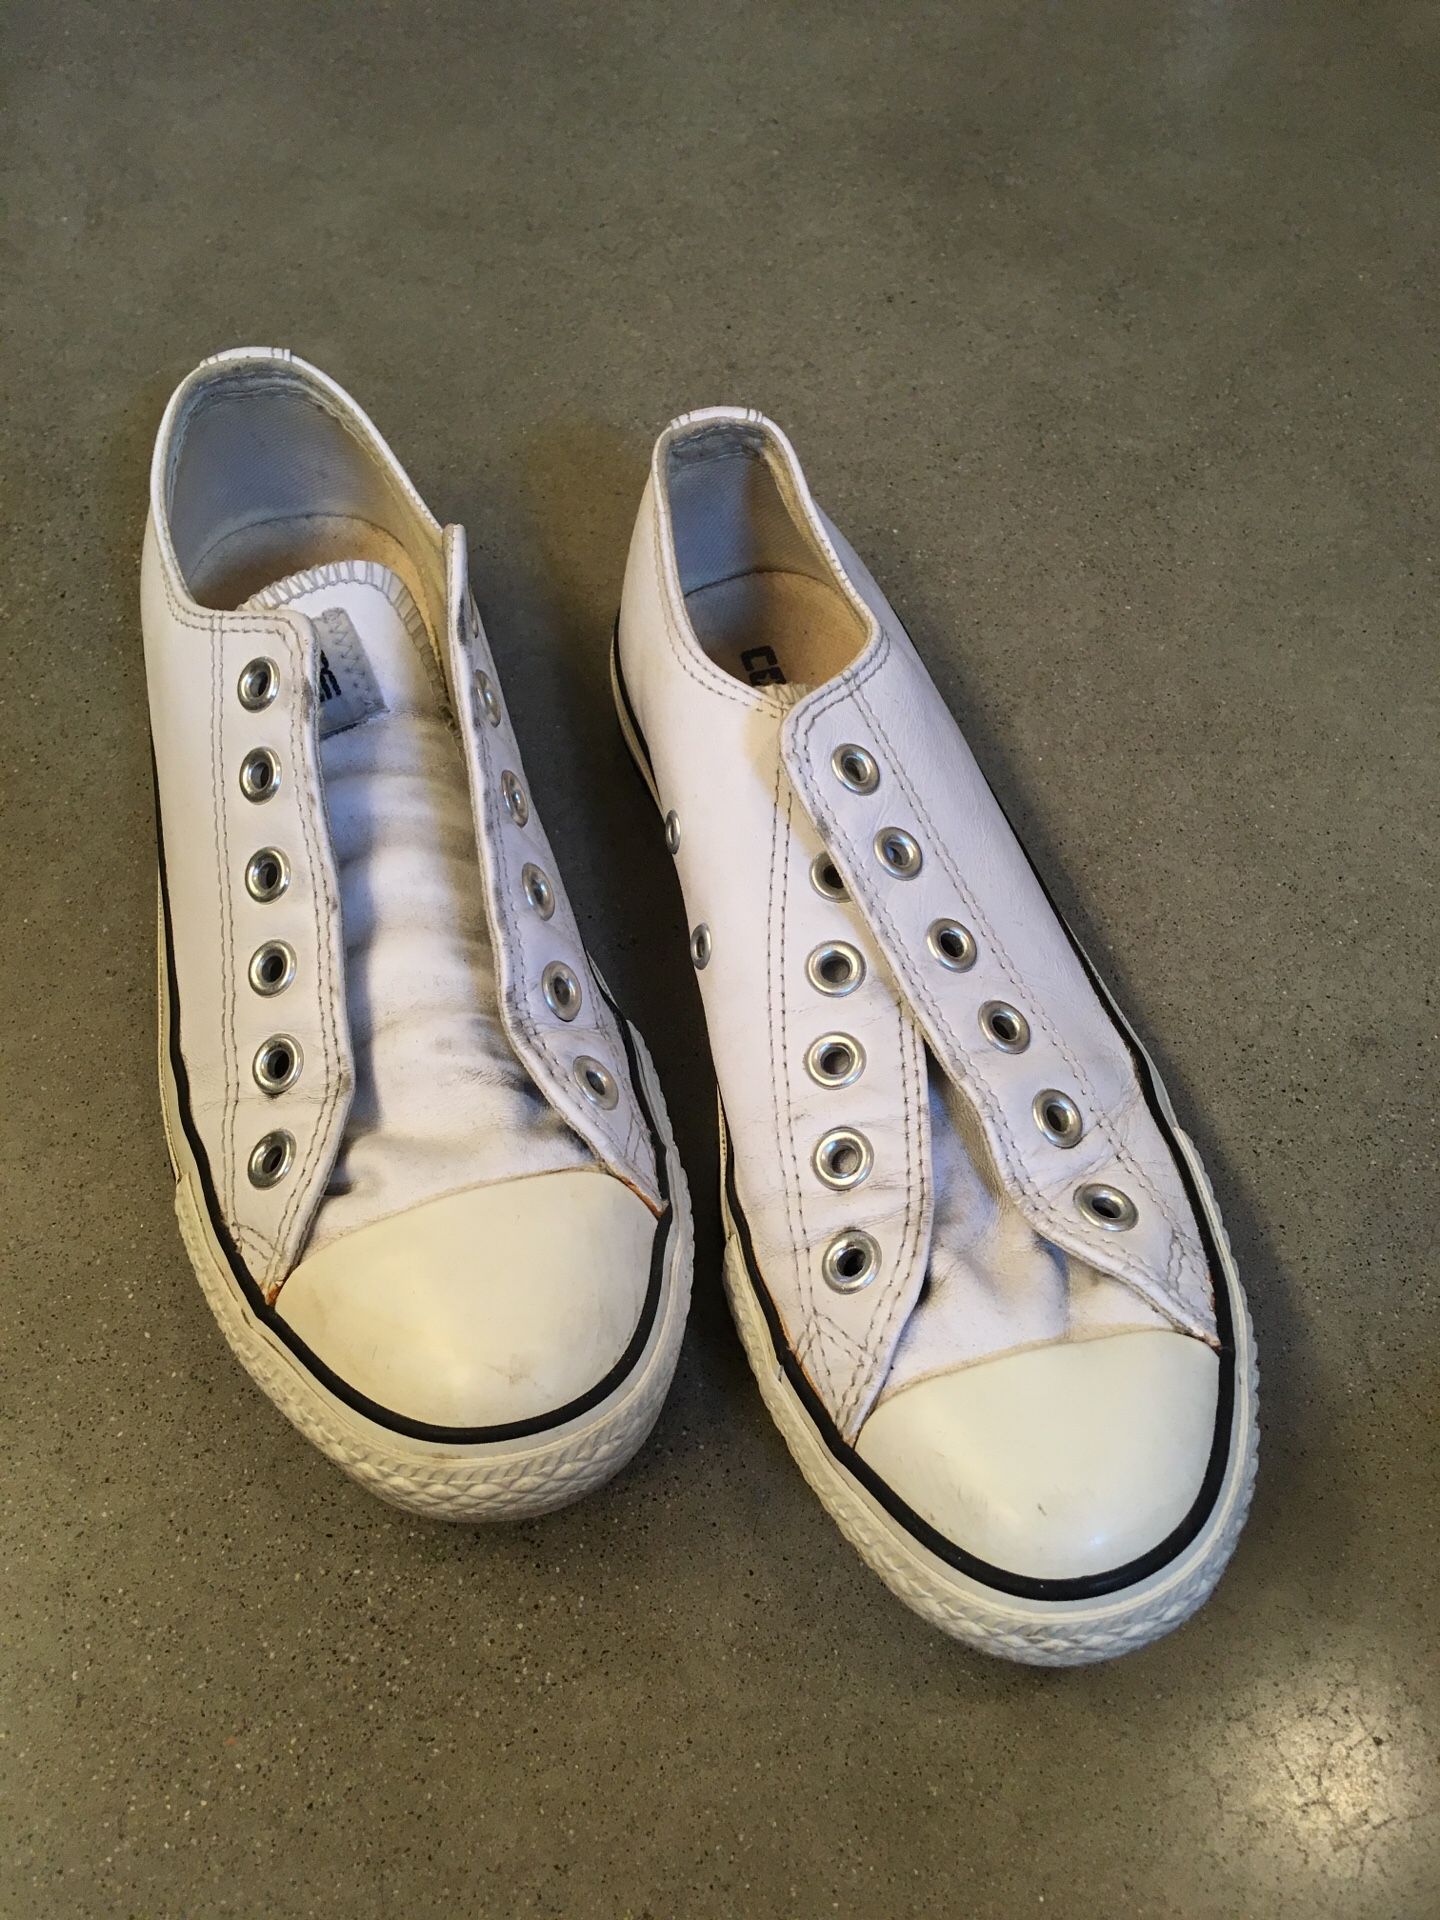 Converse white leather